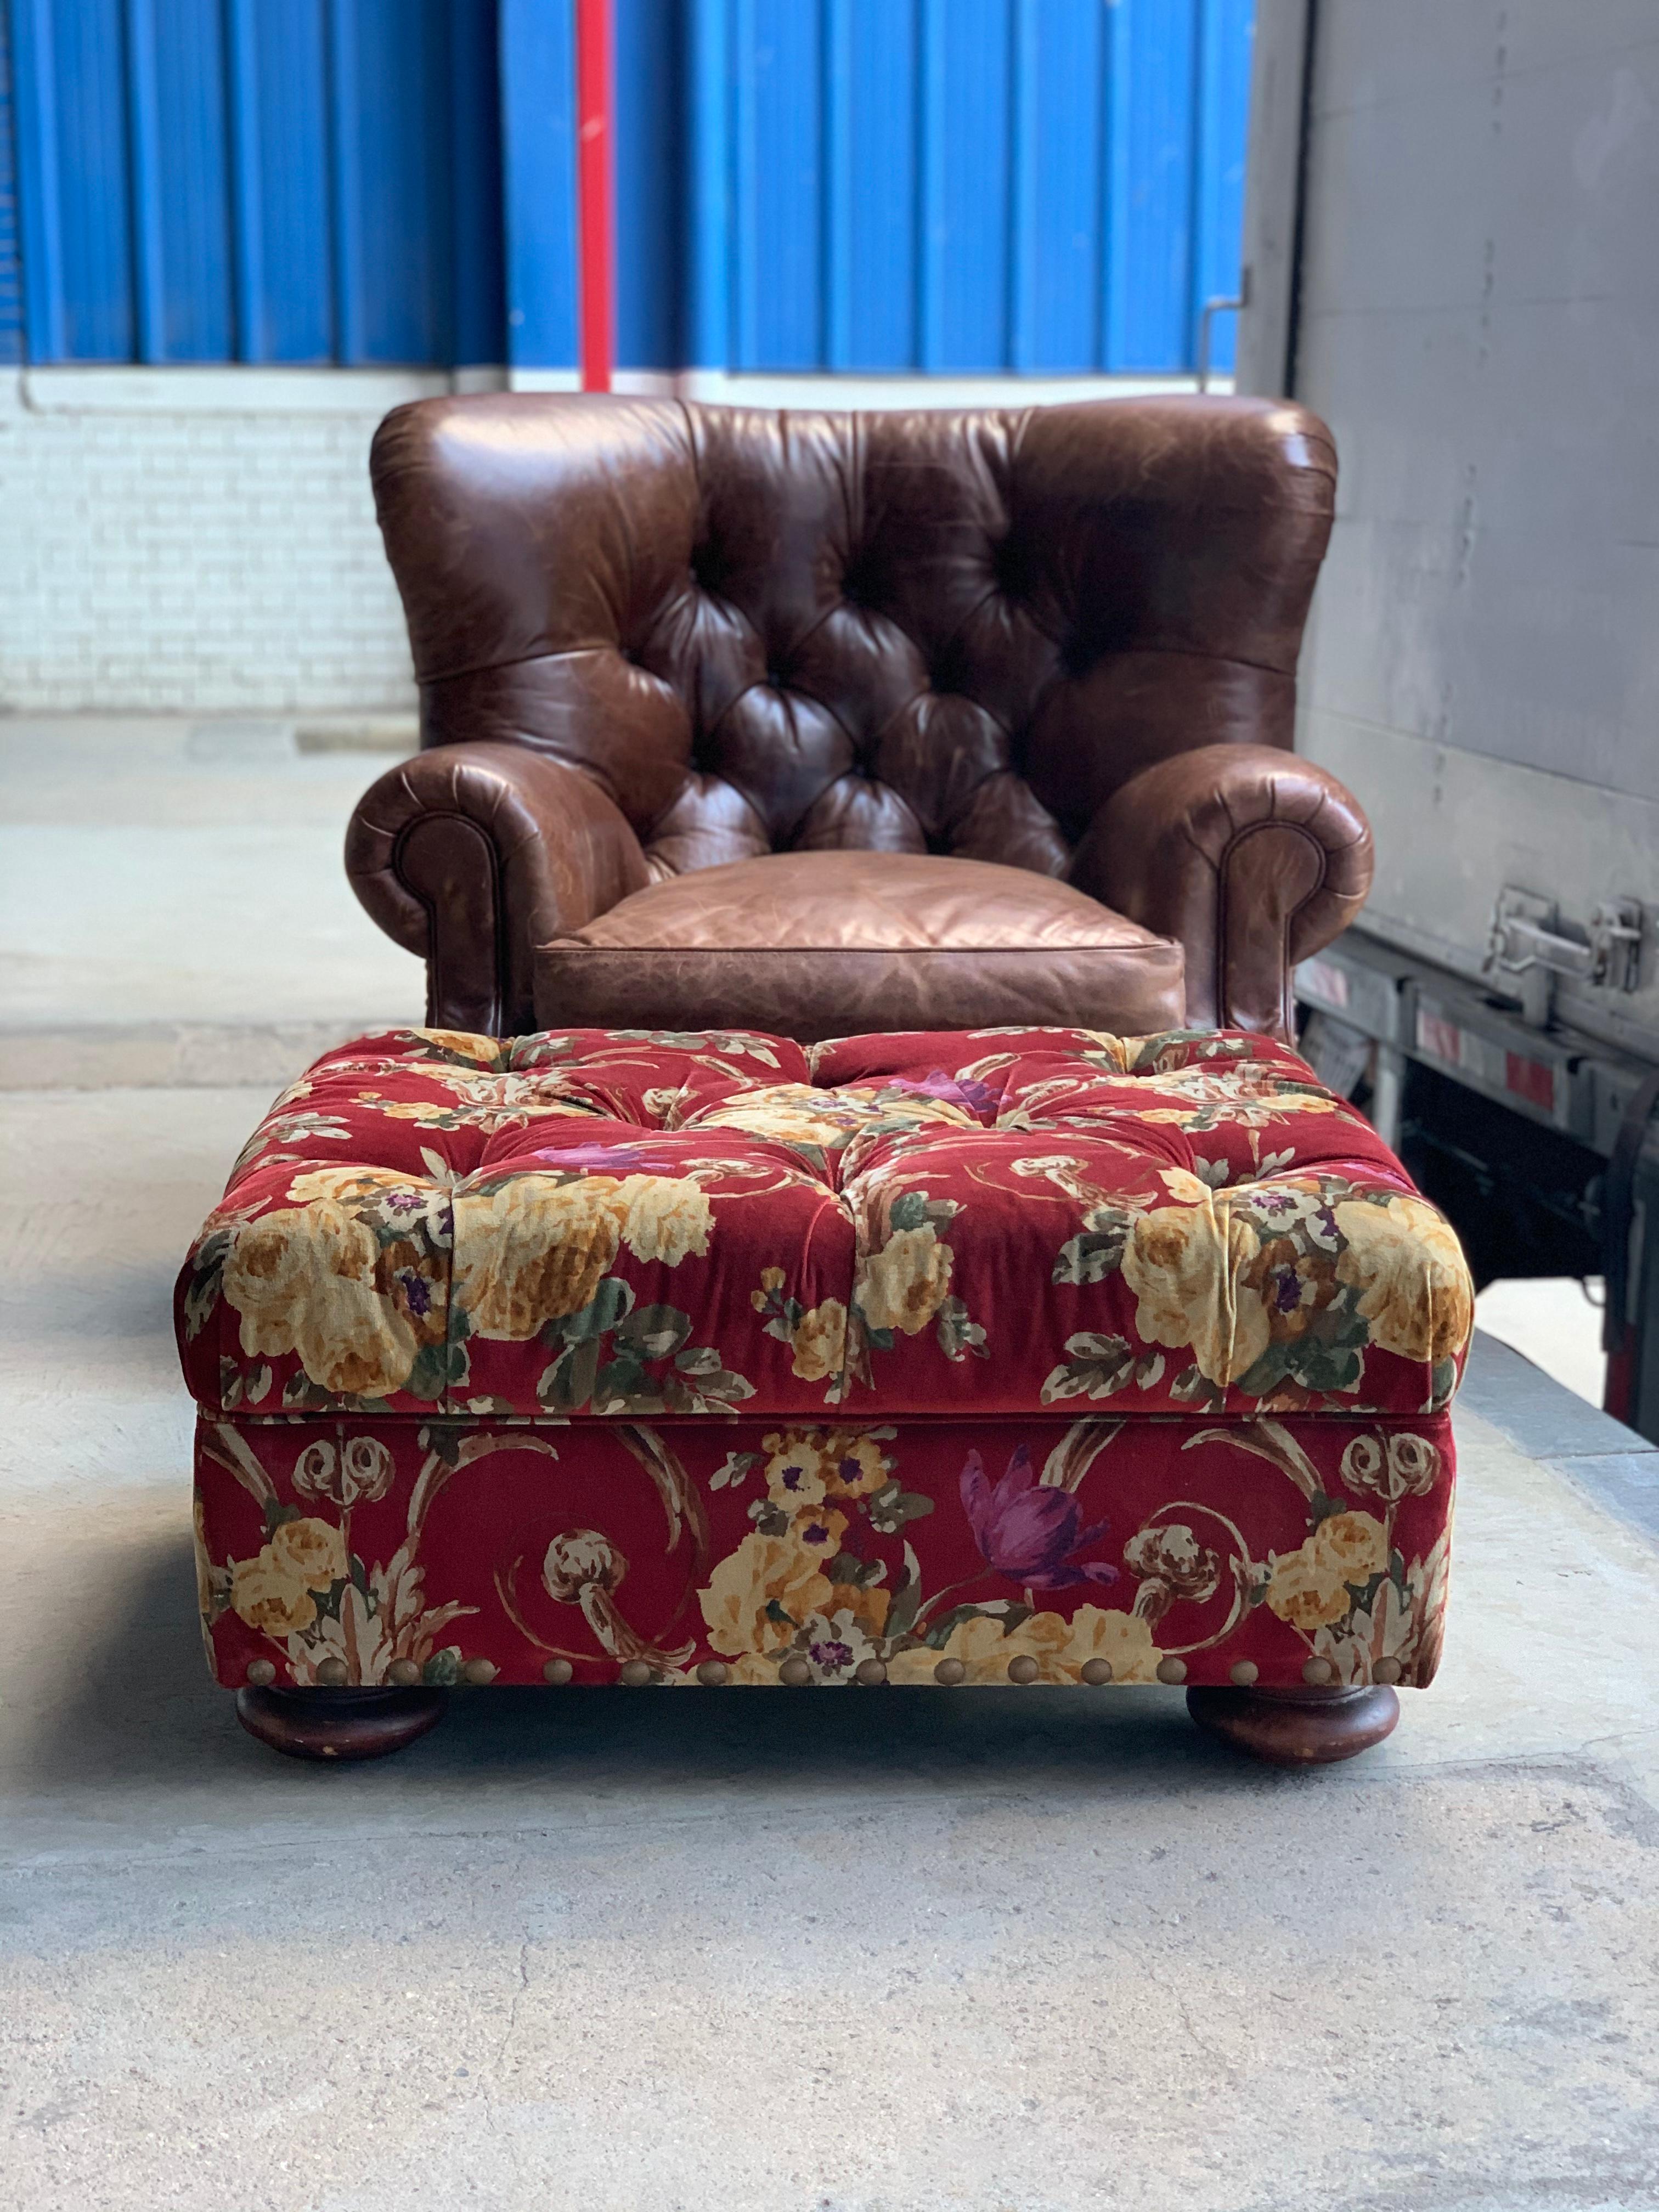 Ralph Lauren x Henredon vintage brown leather writer's armchair, iconic lounge. This iconic winged club chair with bold nailhead trim has a Classic tufted back and burnished mahogany finish on bun feet.
    